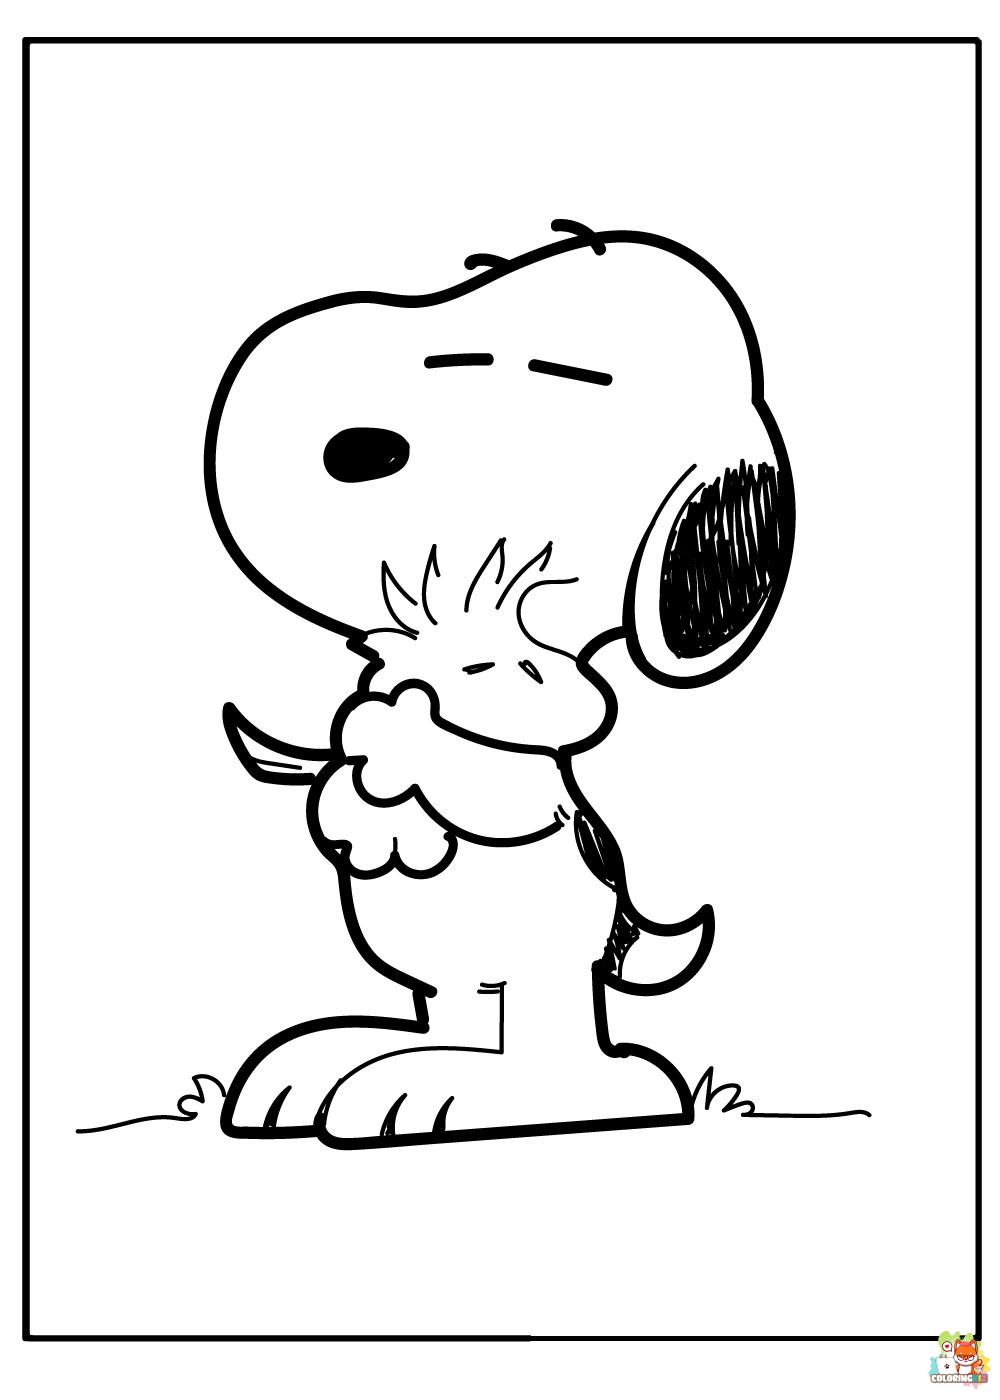 Snoopy Coolest Style Coloring Pages 7